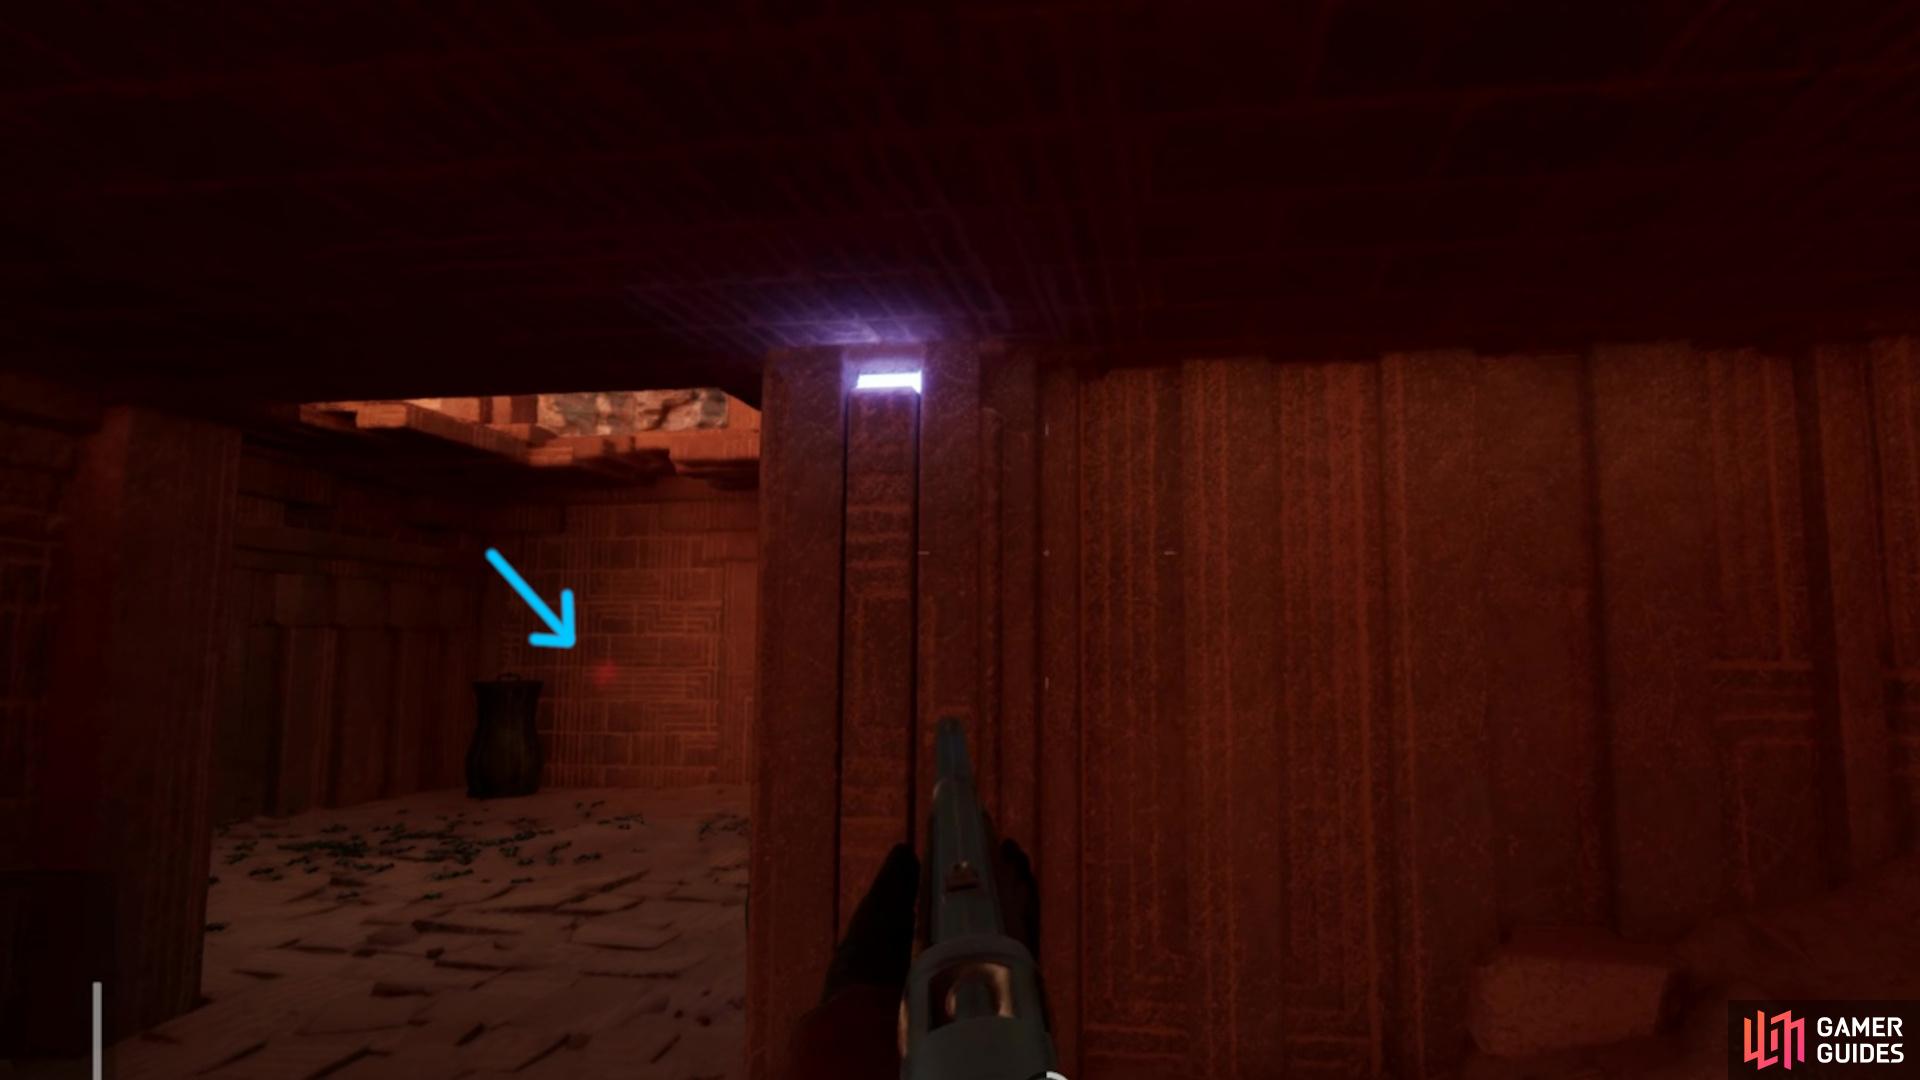 When faced with Insight Puzzles in Vaults, look for feint red glows as it helps with finding difficult and well-hidden runes inside buildings, tunnels, and open spaces.